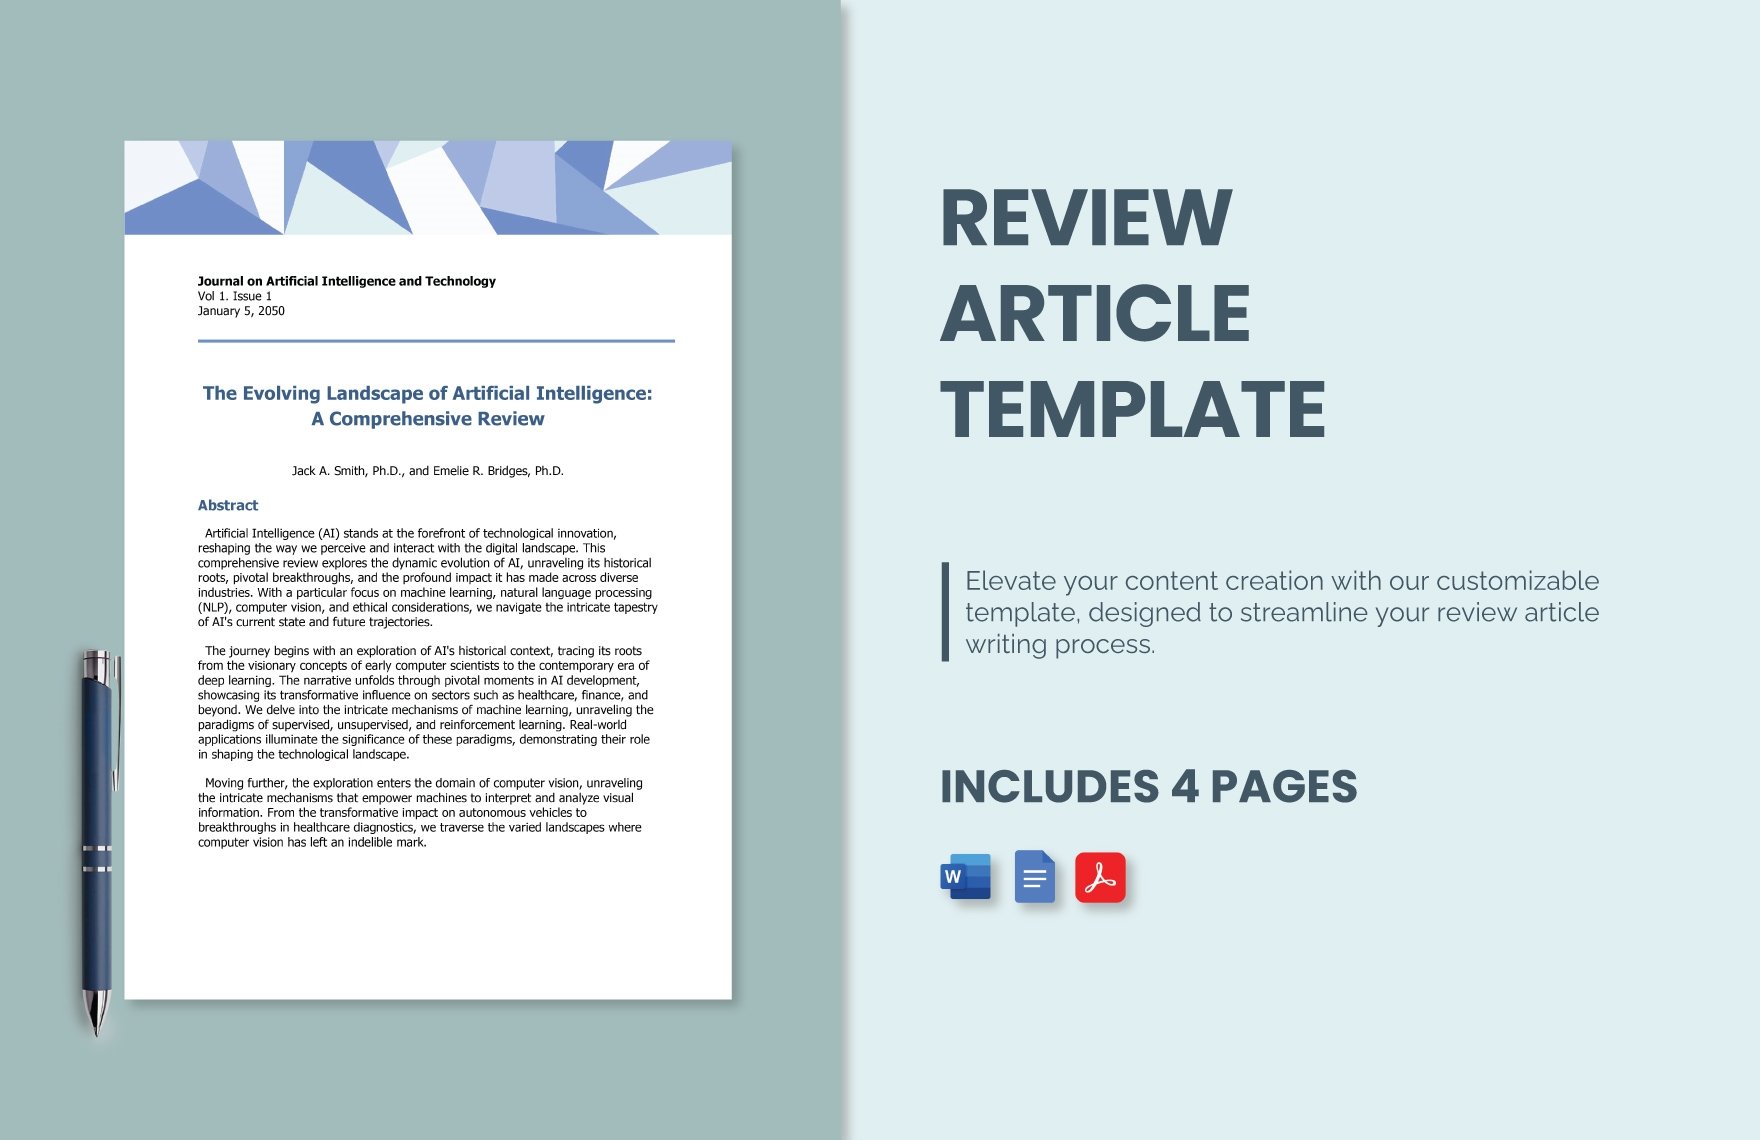 Review Article Template